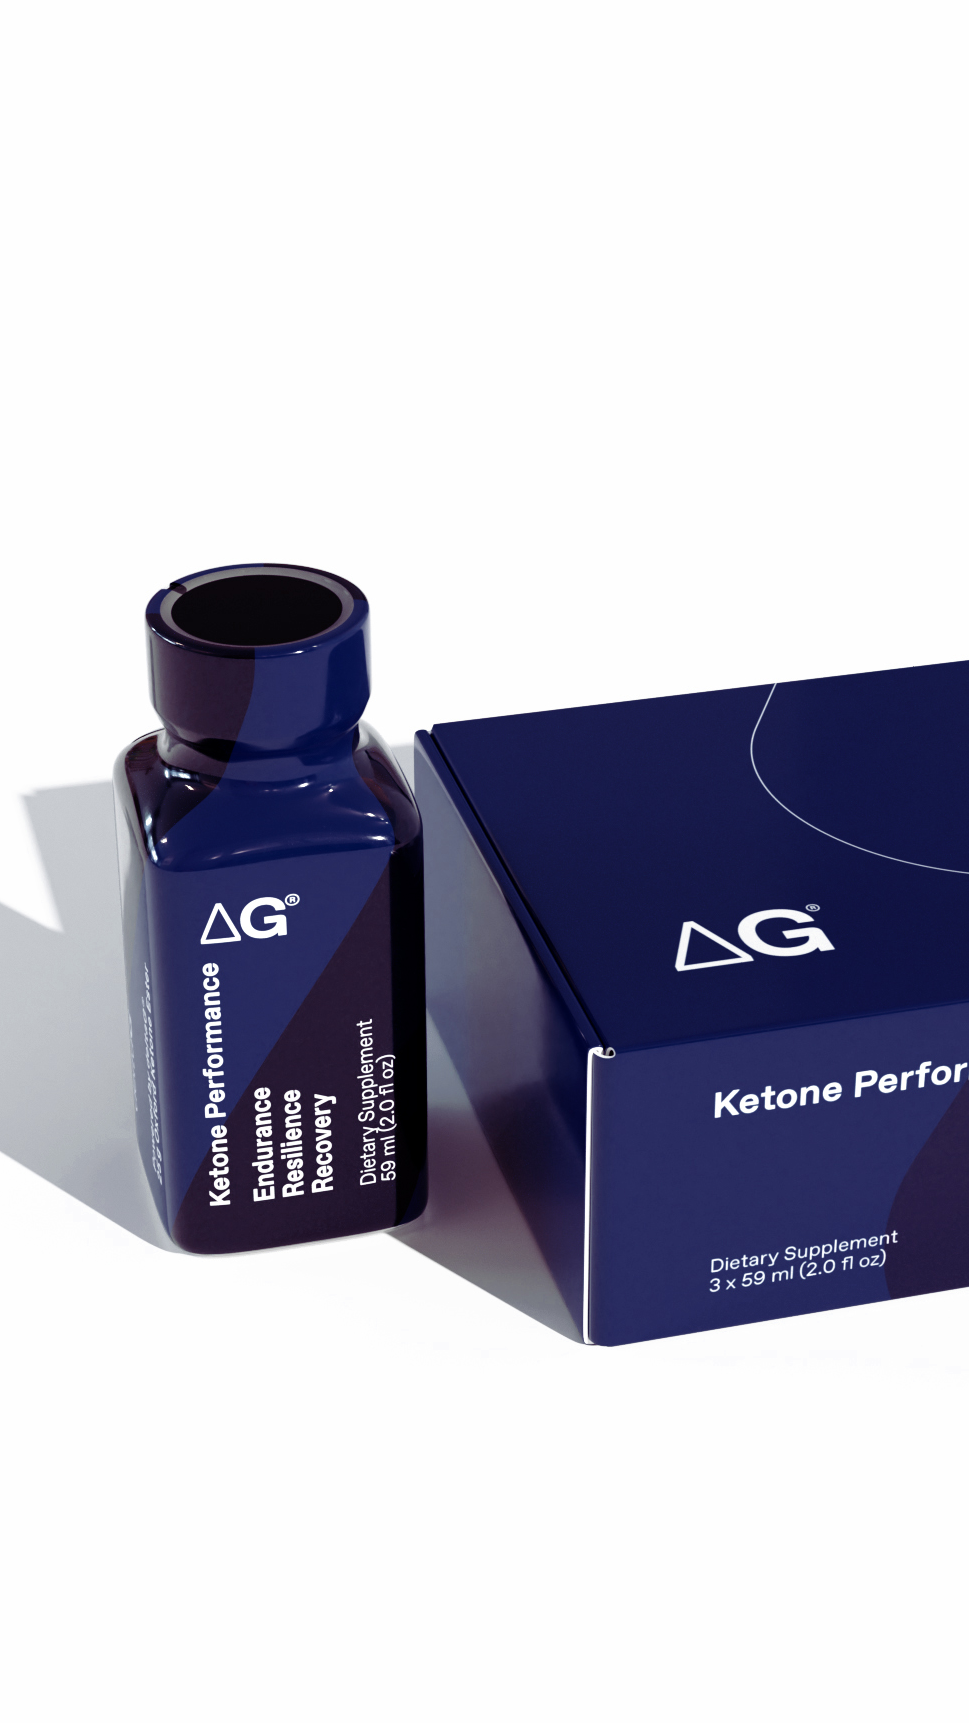 Ketone Monoester Products Like deltaG Shown To Improve Endurance In 30-50 Y/Os